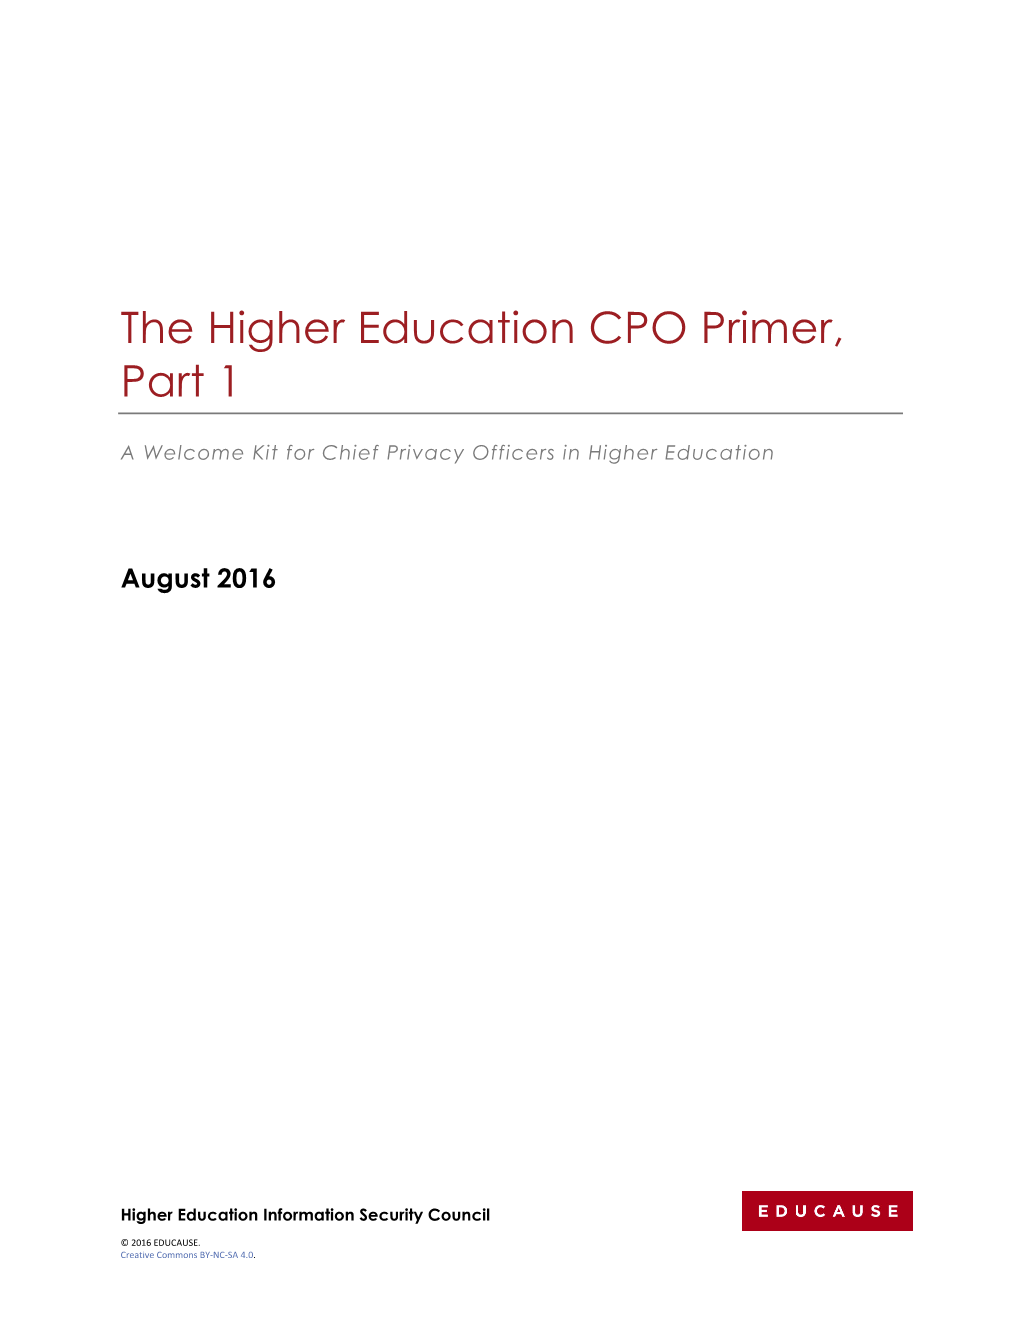 The Higher Education CPO Primer, Part 1